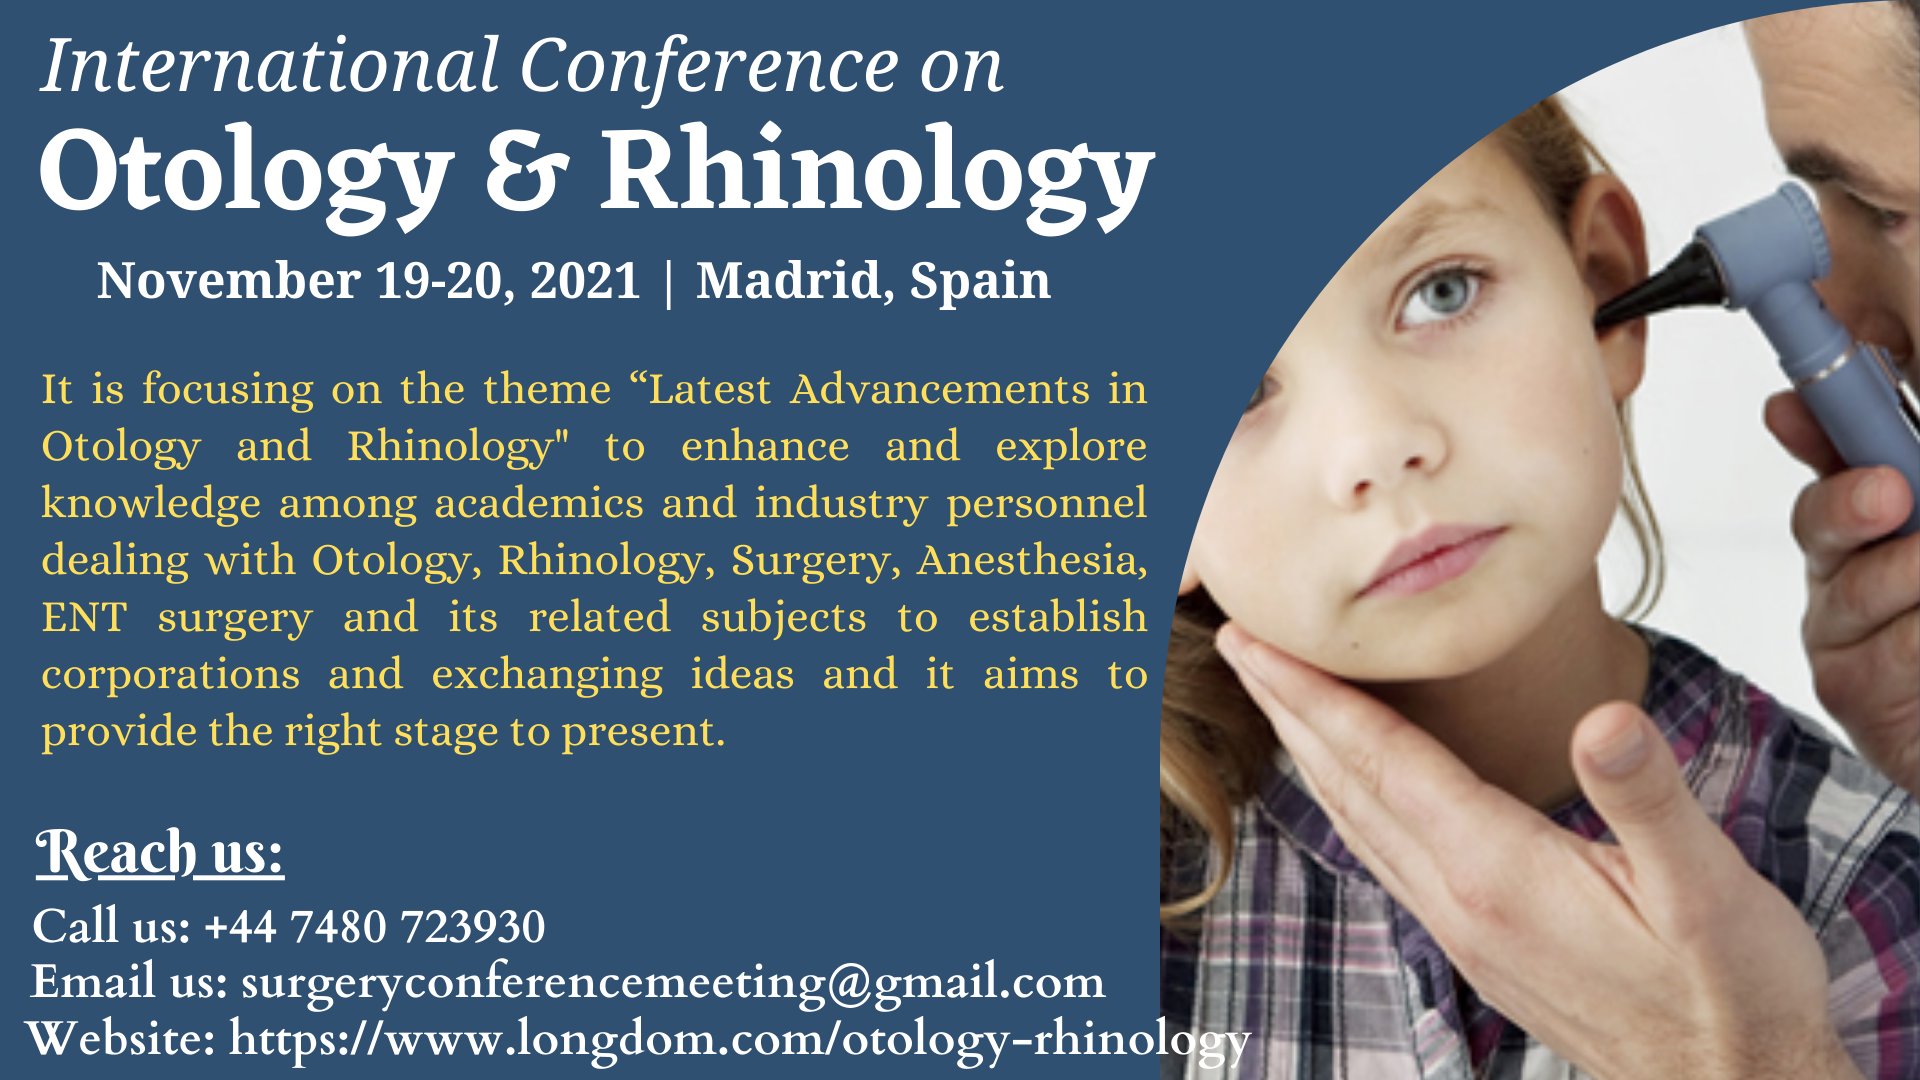 International Conference on Otology and Rhinology, Madrid, Spain